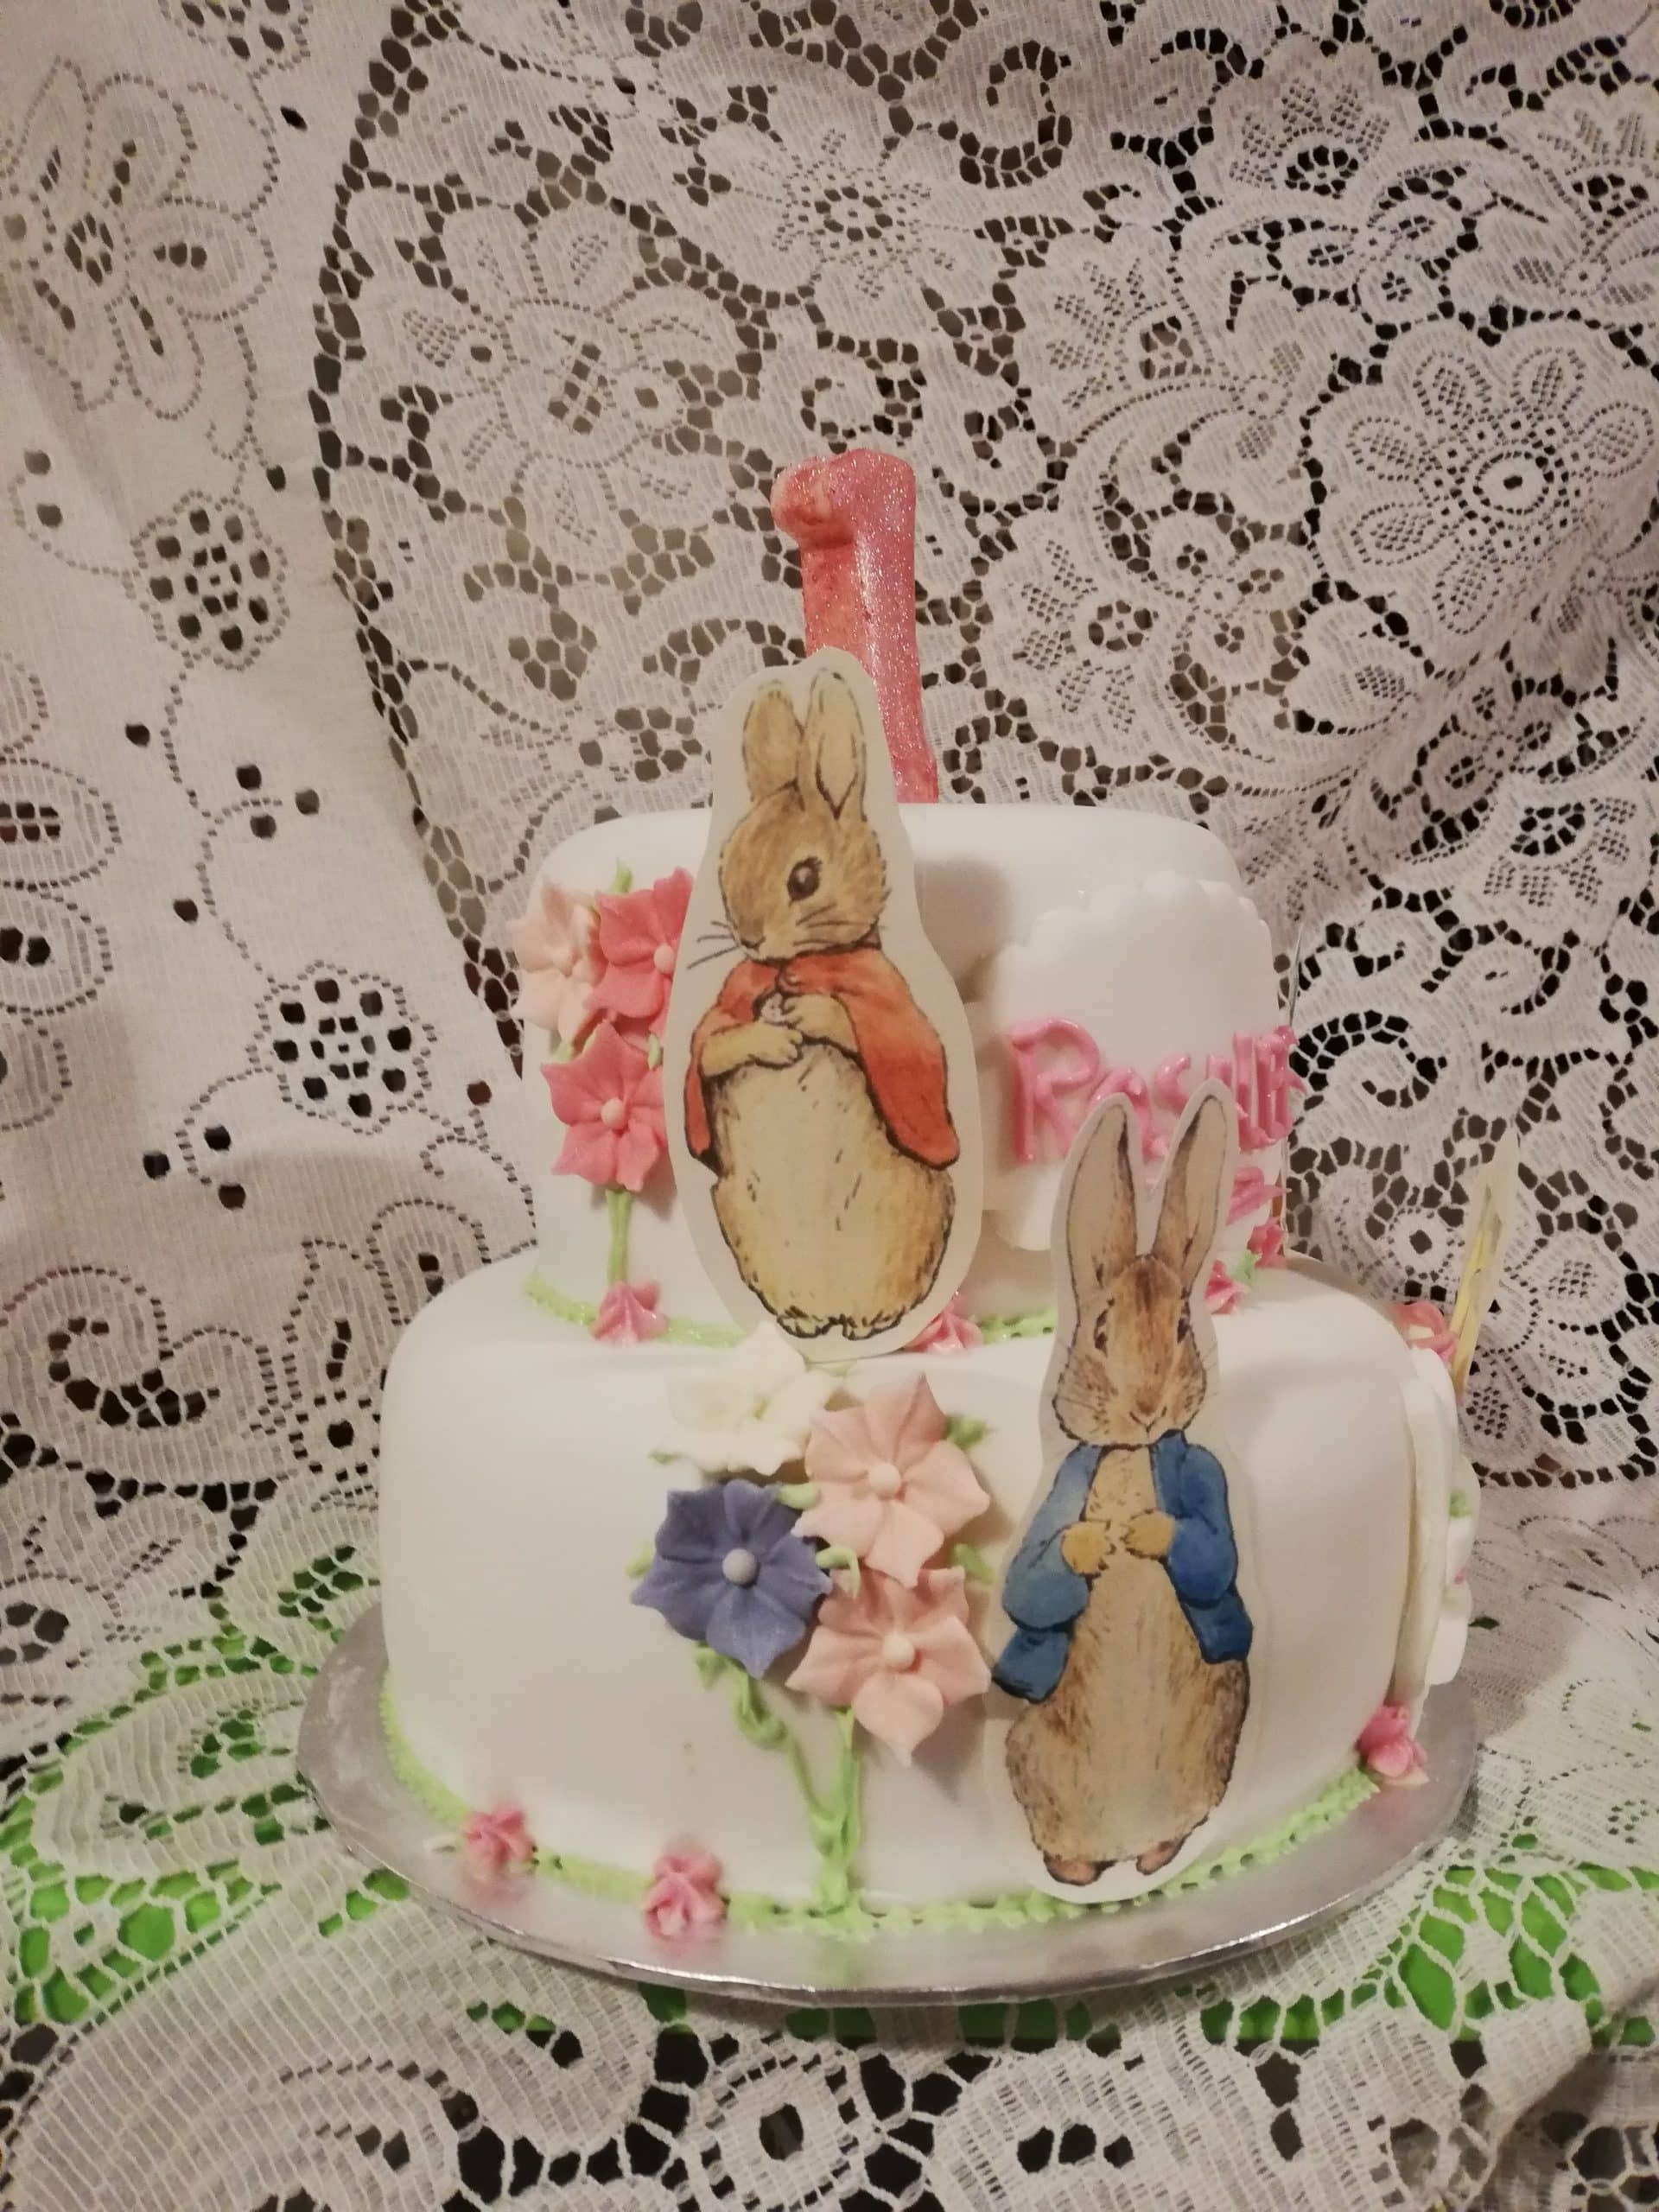 Coco Cake Land's Bunny Cake + New Book! - Constellation Inspiration